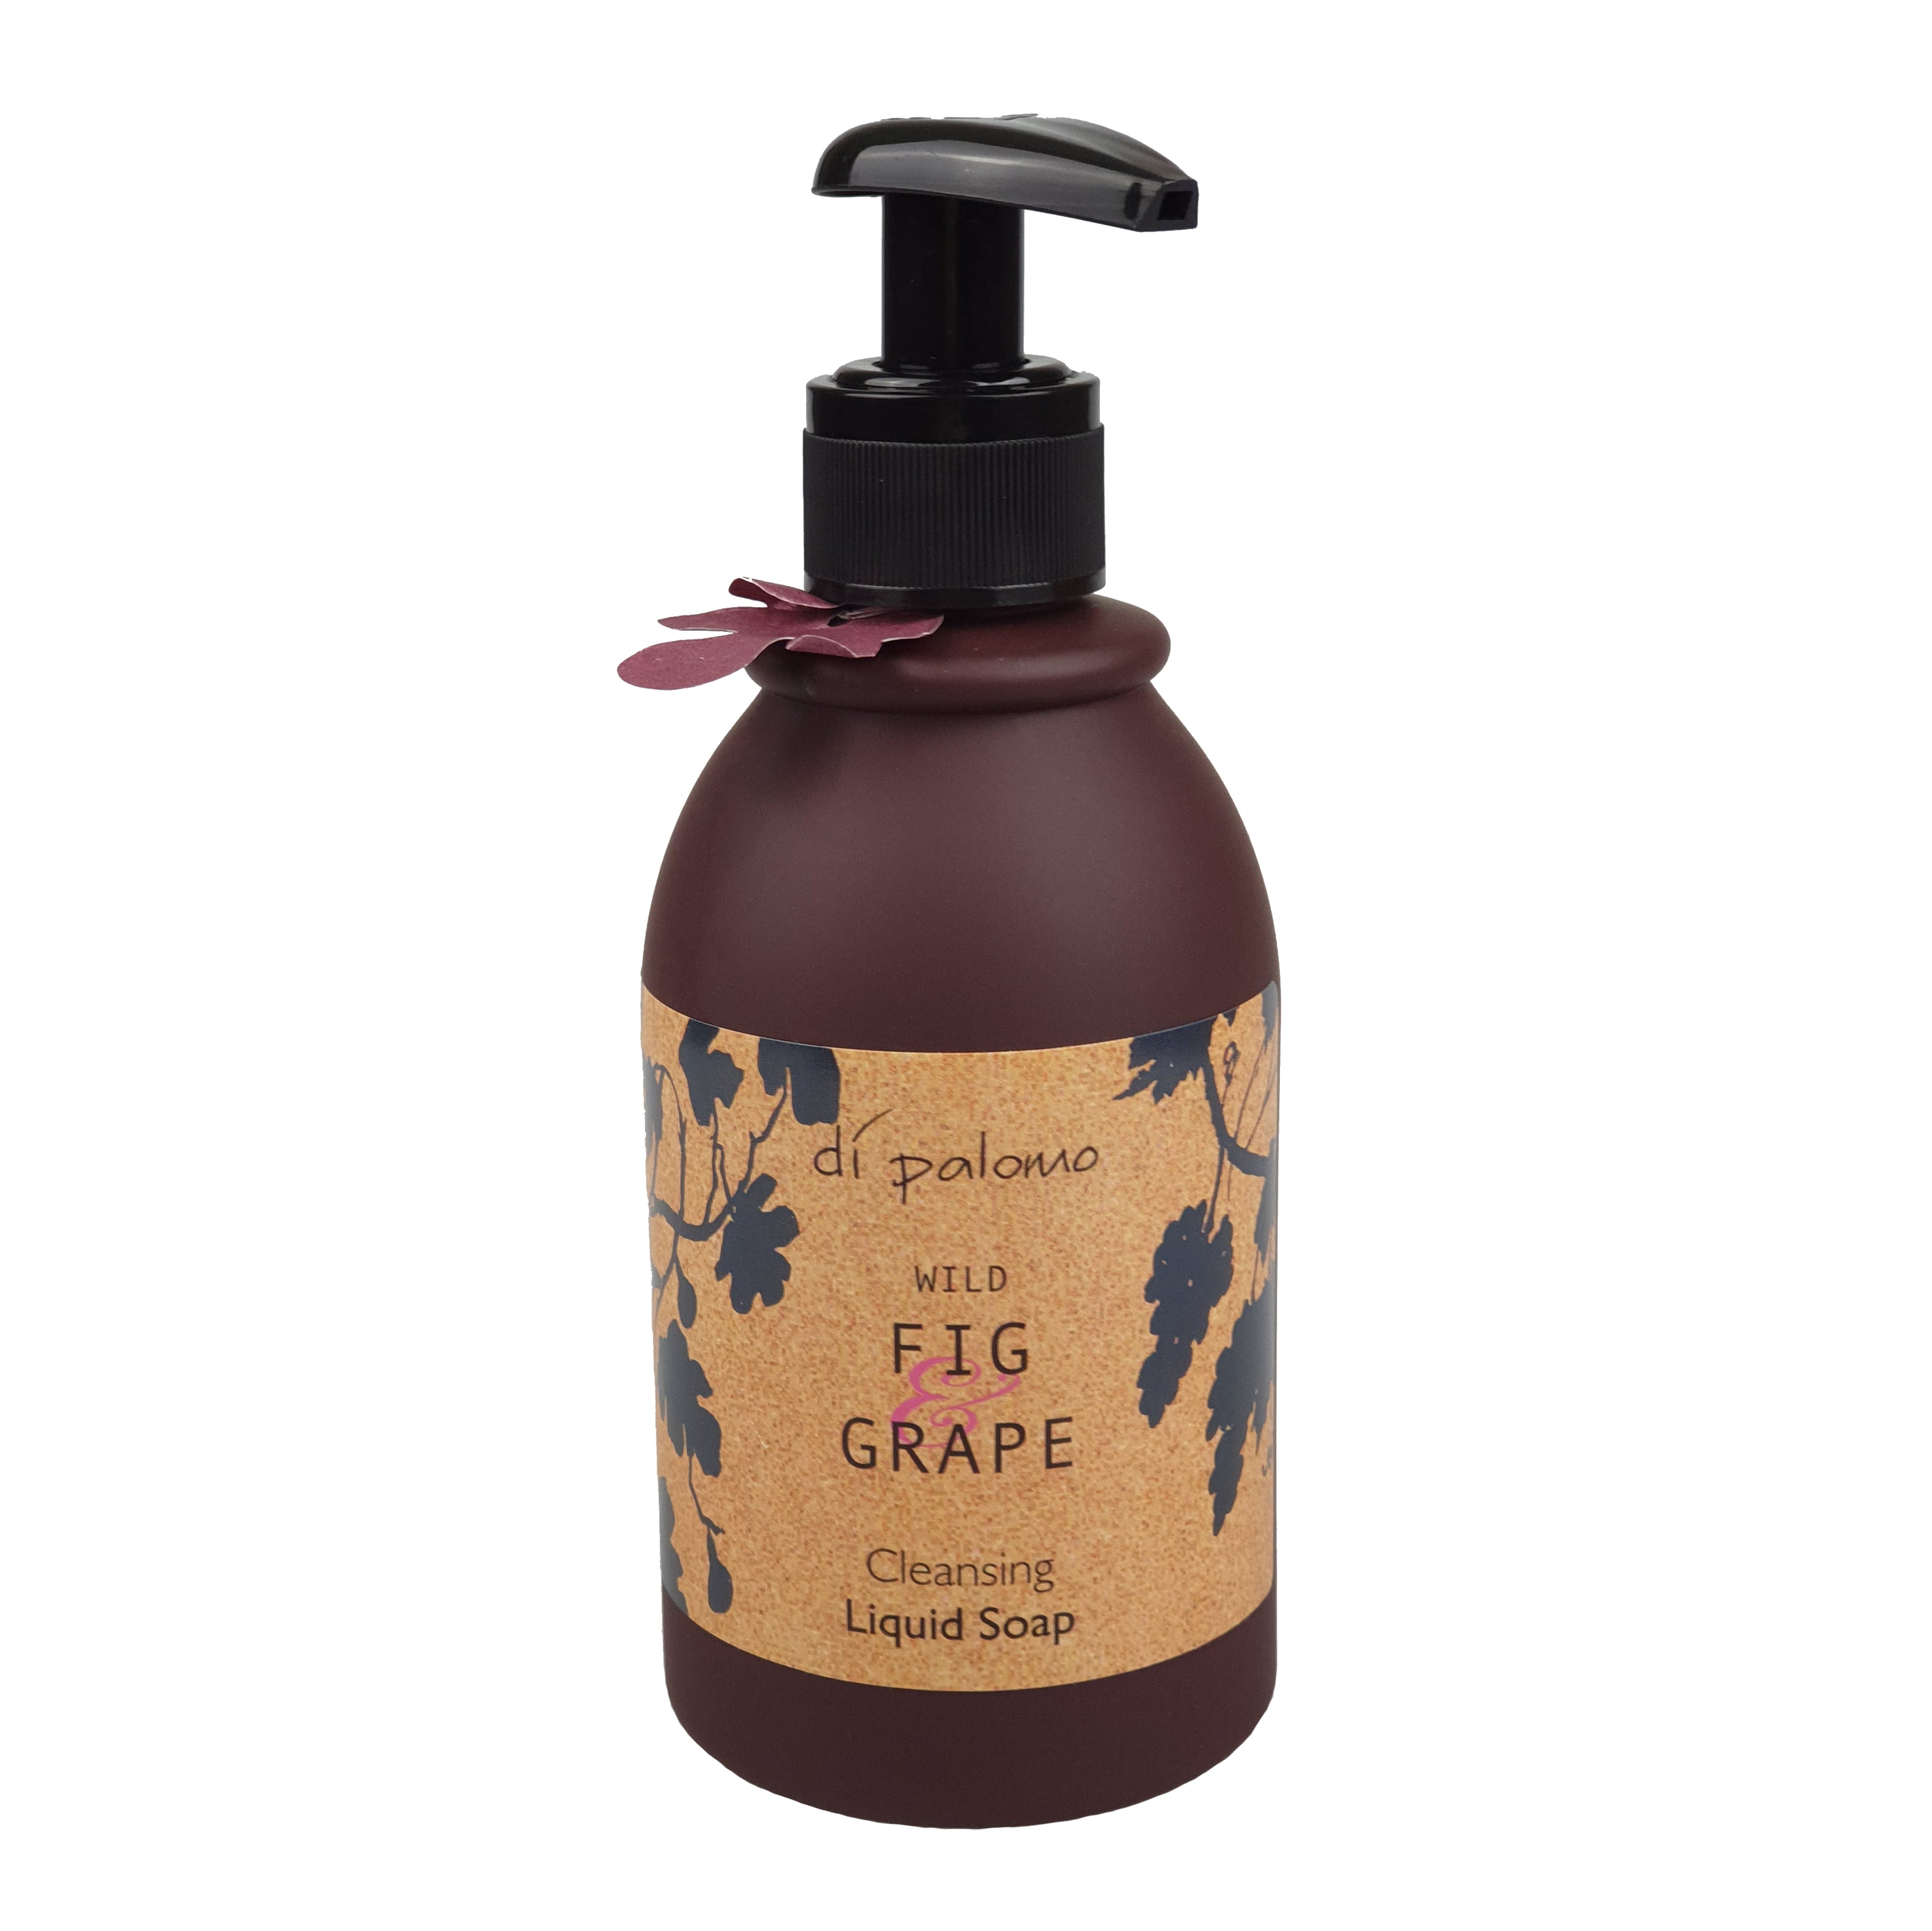 A luxurious, antibacterial hand wash, containing our Wild Fig & Grape fragrance to cleanse and refresh your hands. For best results, use our Hand & Nail Cream or Hand & Body Lotion after to add extra moisture to your skin. 